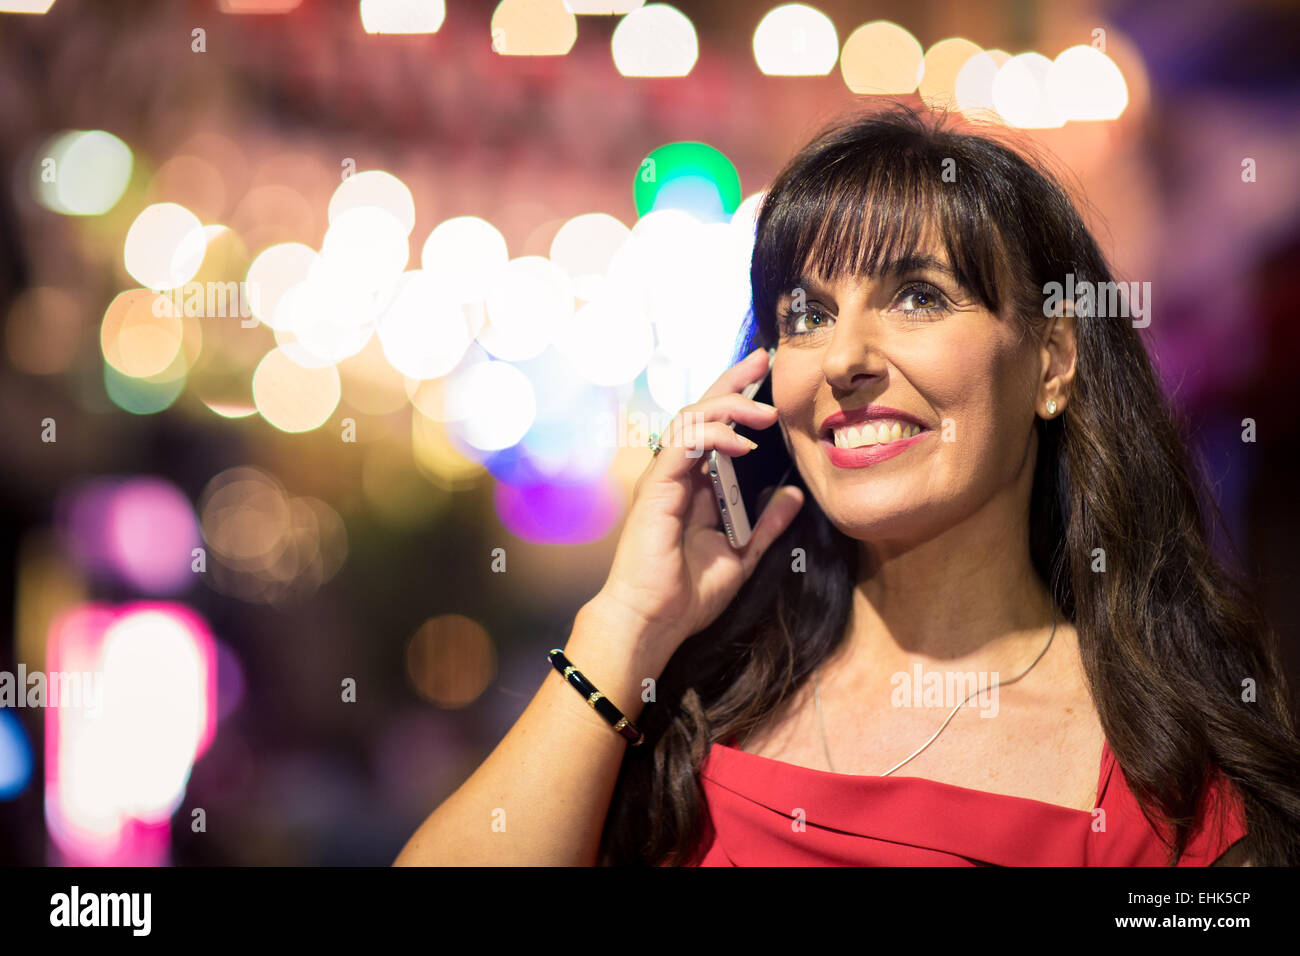 A woman in her 40's on her mobile device during a night out Stock Photo